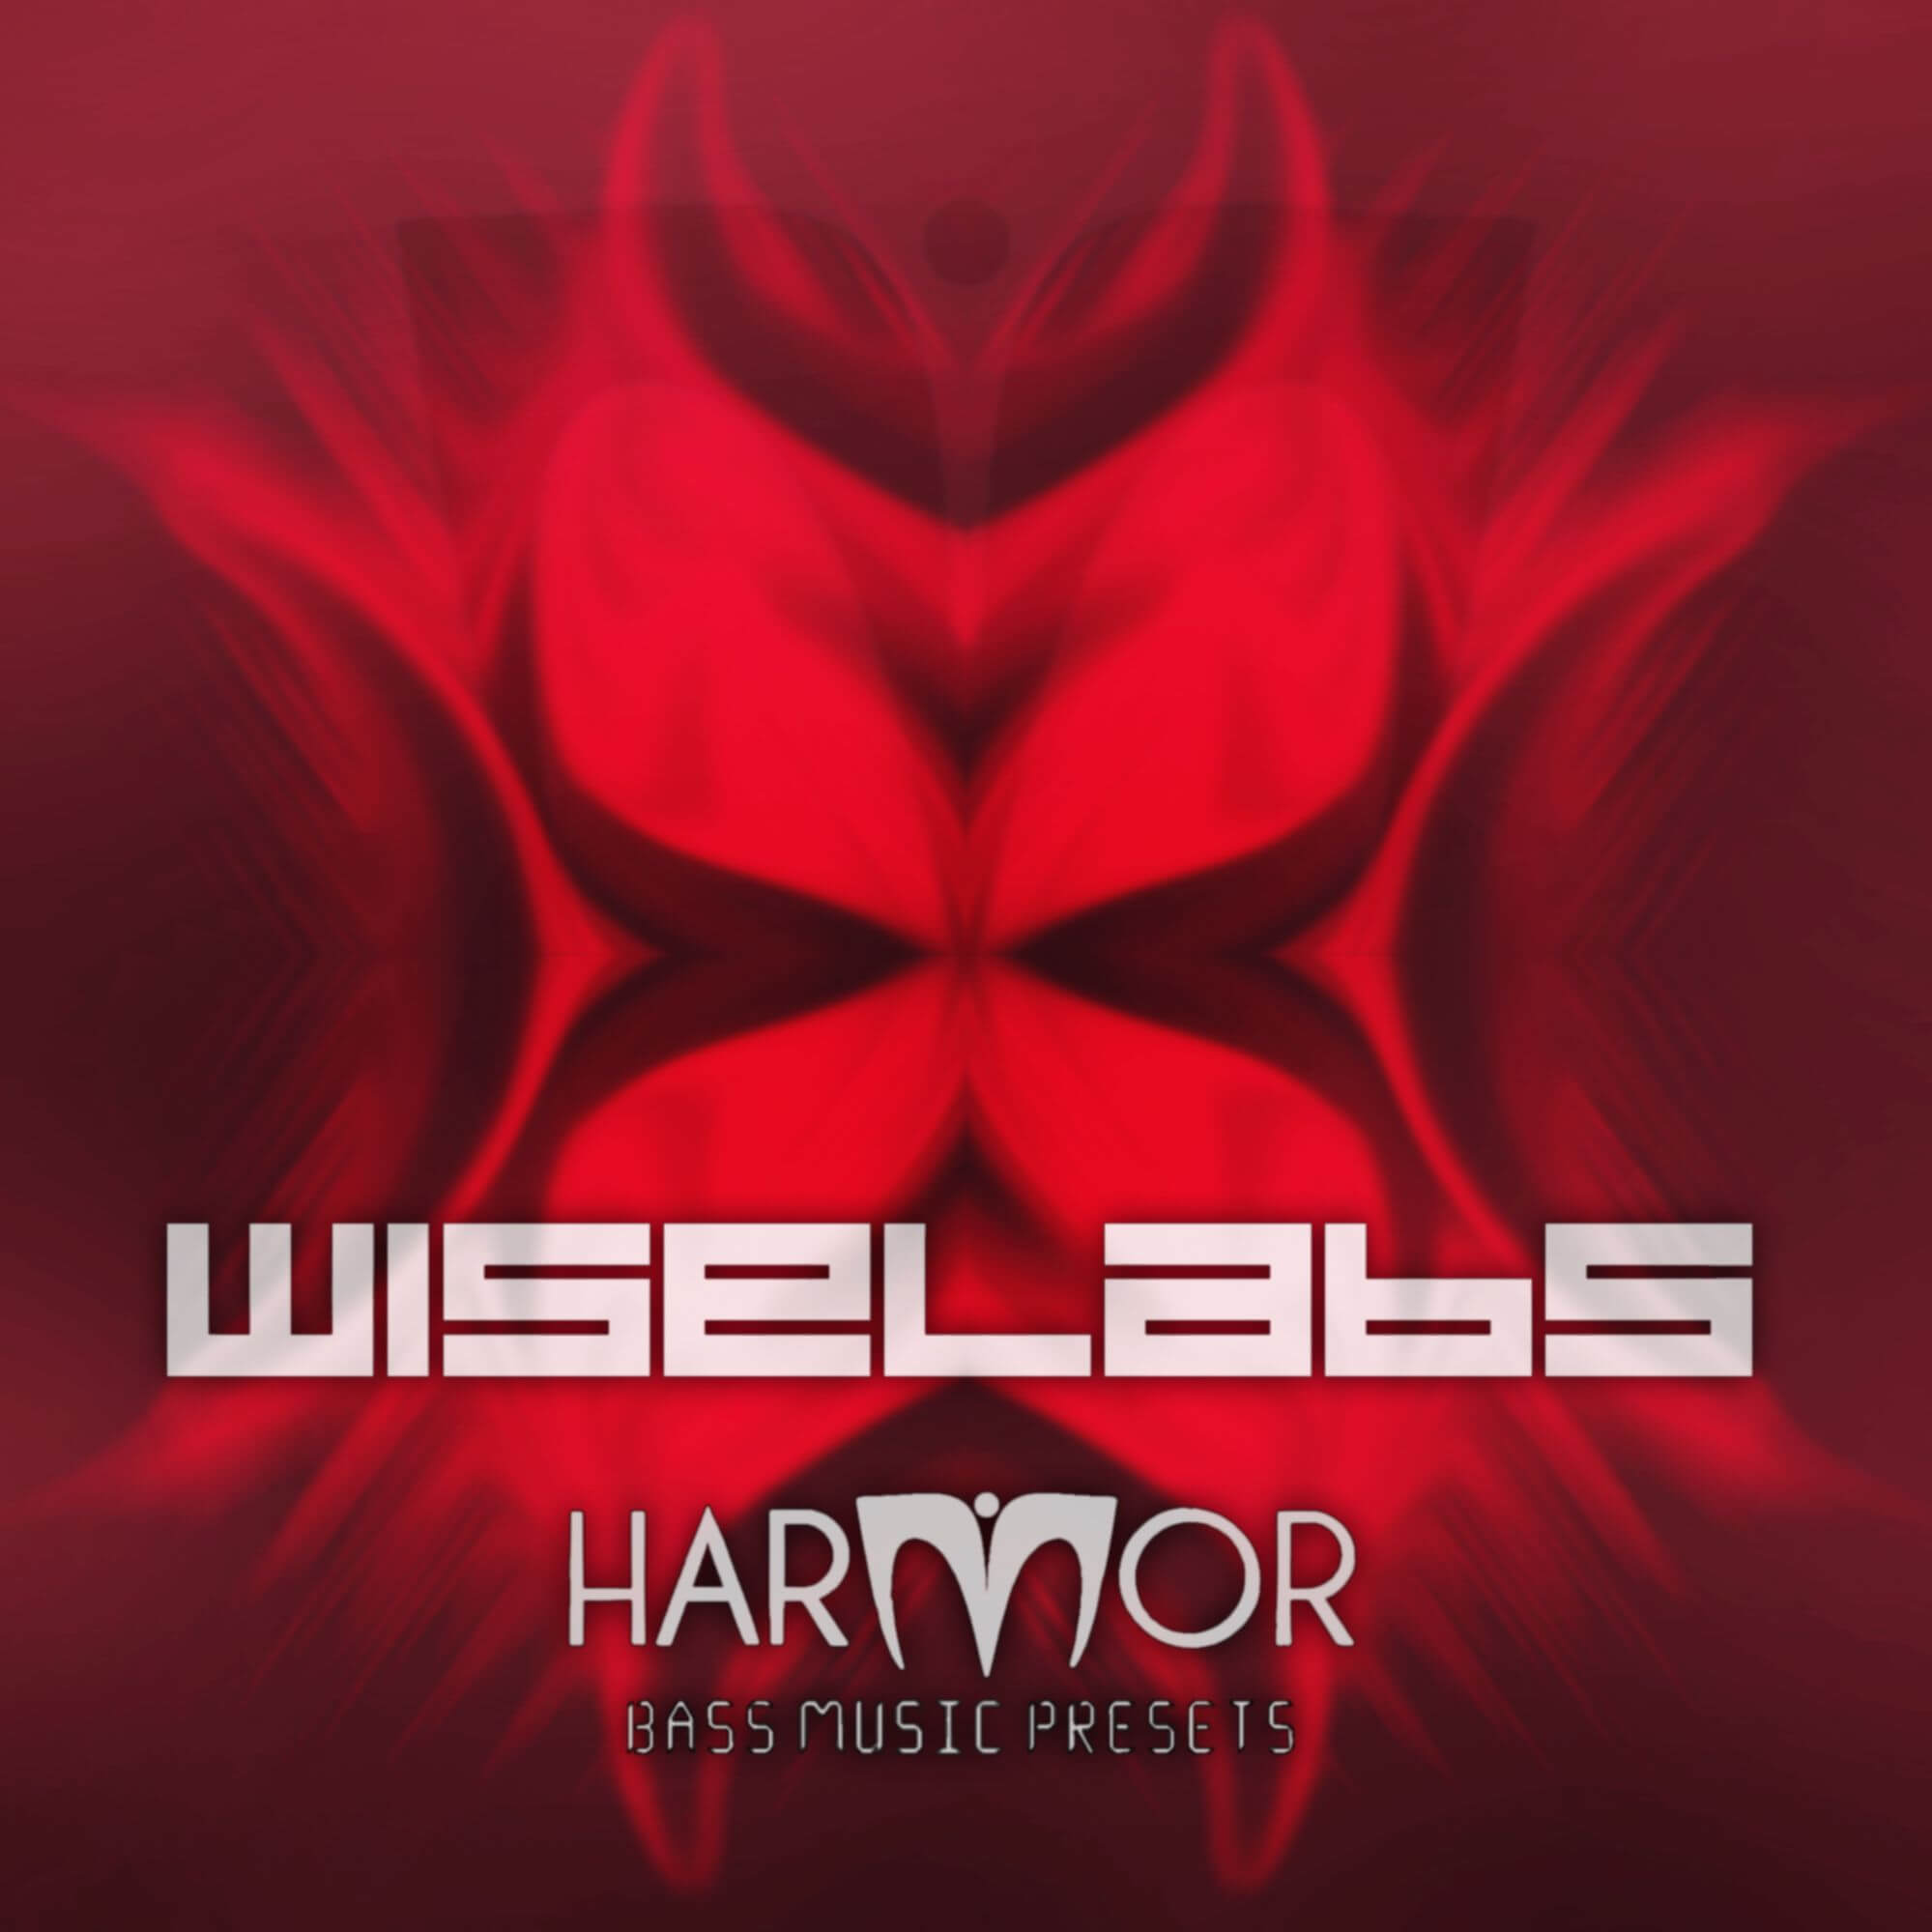 WiseLabs Bass Music presets for Harmor at Image-Line